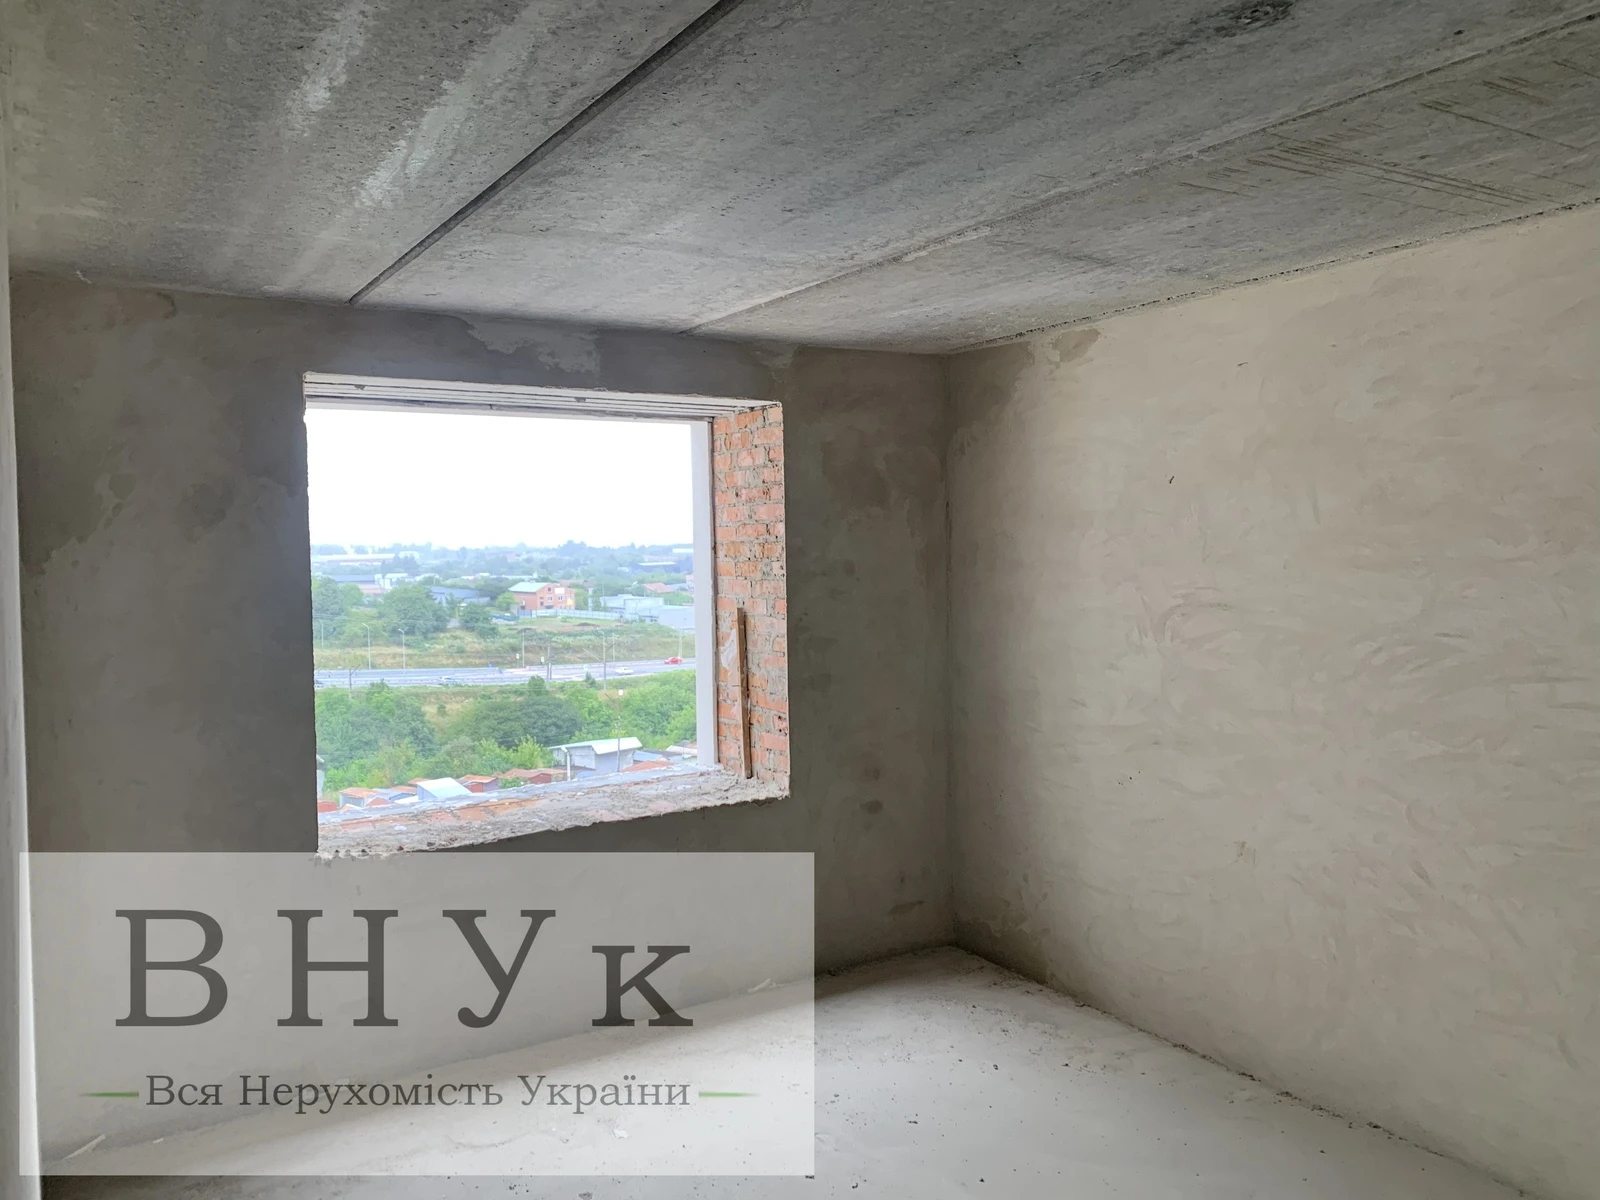 Apartments for sale. 2 rooms, 67 m², 5th floor/9 floors. Dovzhenka O. vul., Ternopil. 